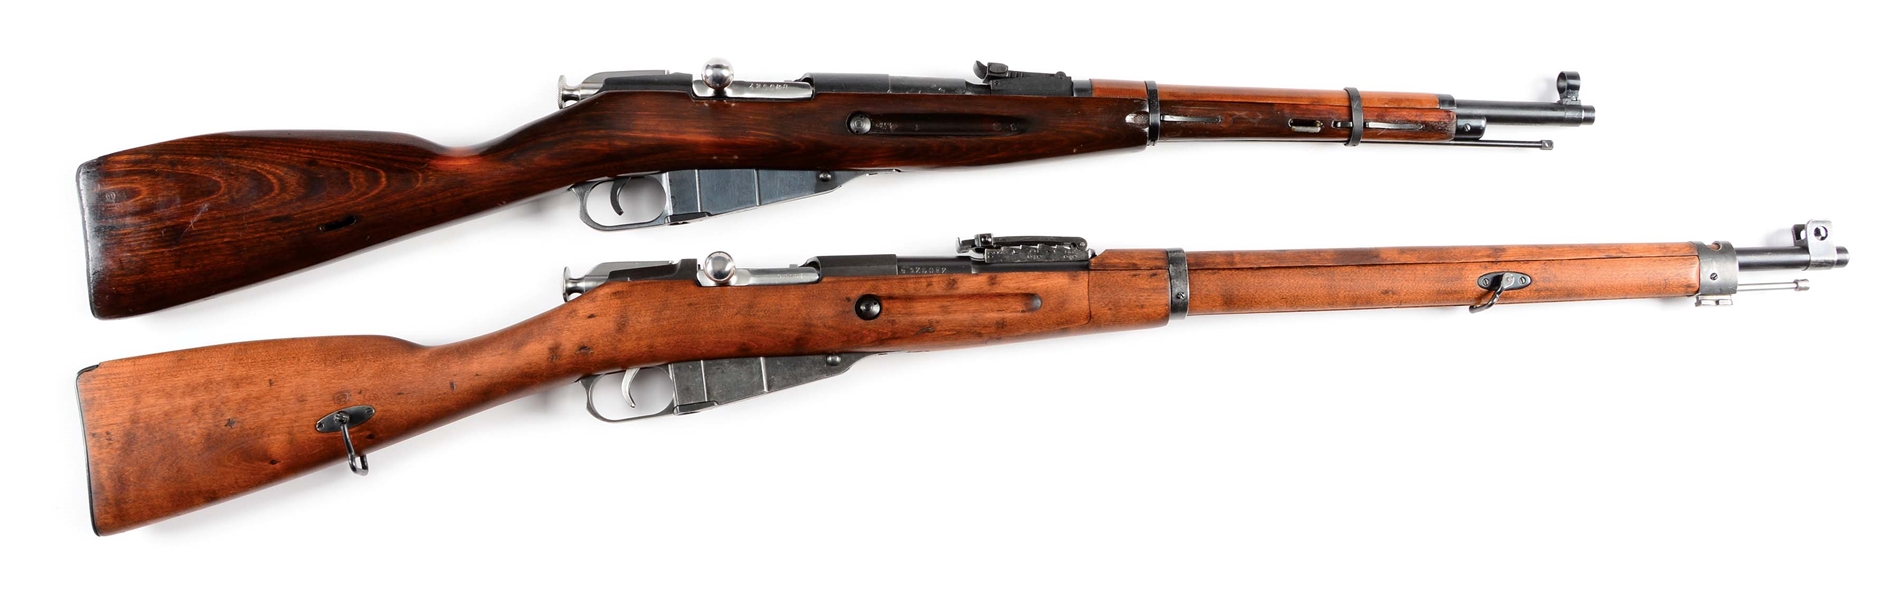 (C) LOT OF 2: IZHEVSK M38 RIFLE WITH BOX AND ACCESSORIES, AND SAKO M28 RIFLE.